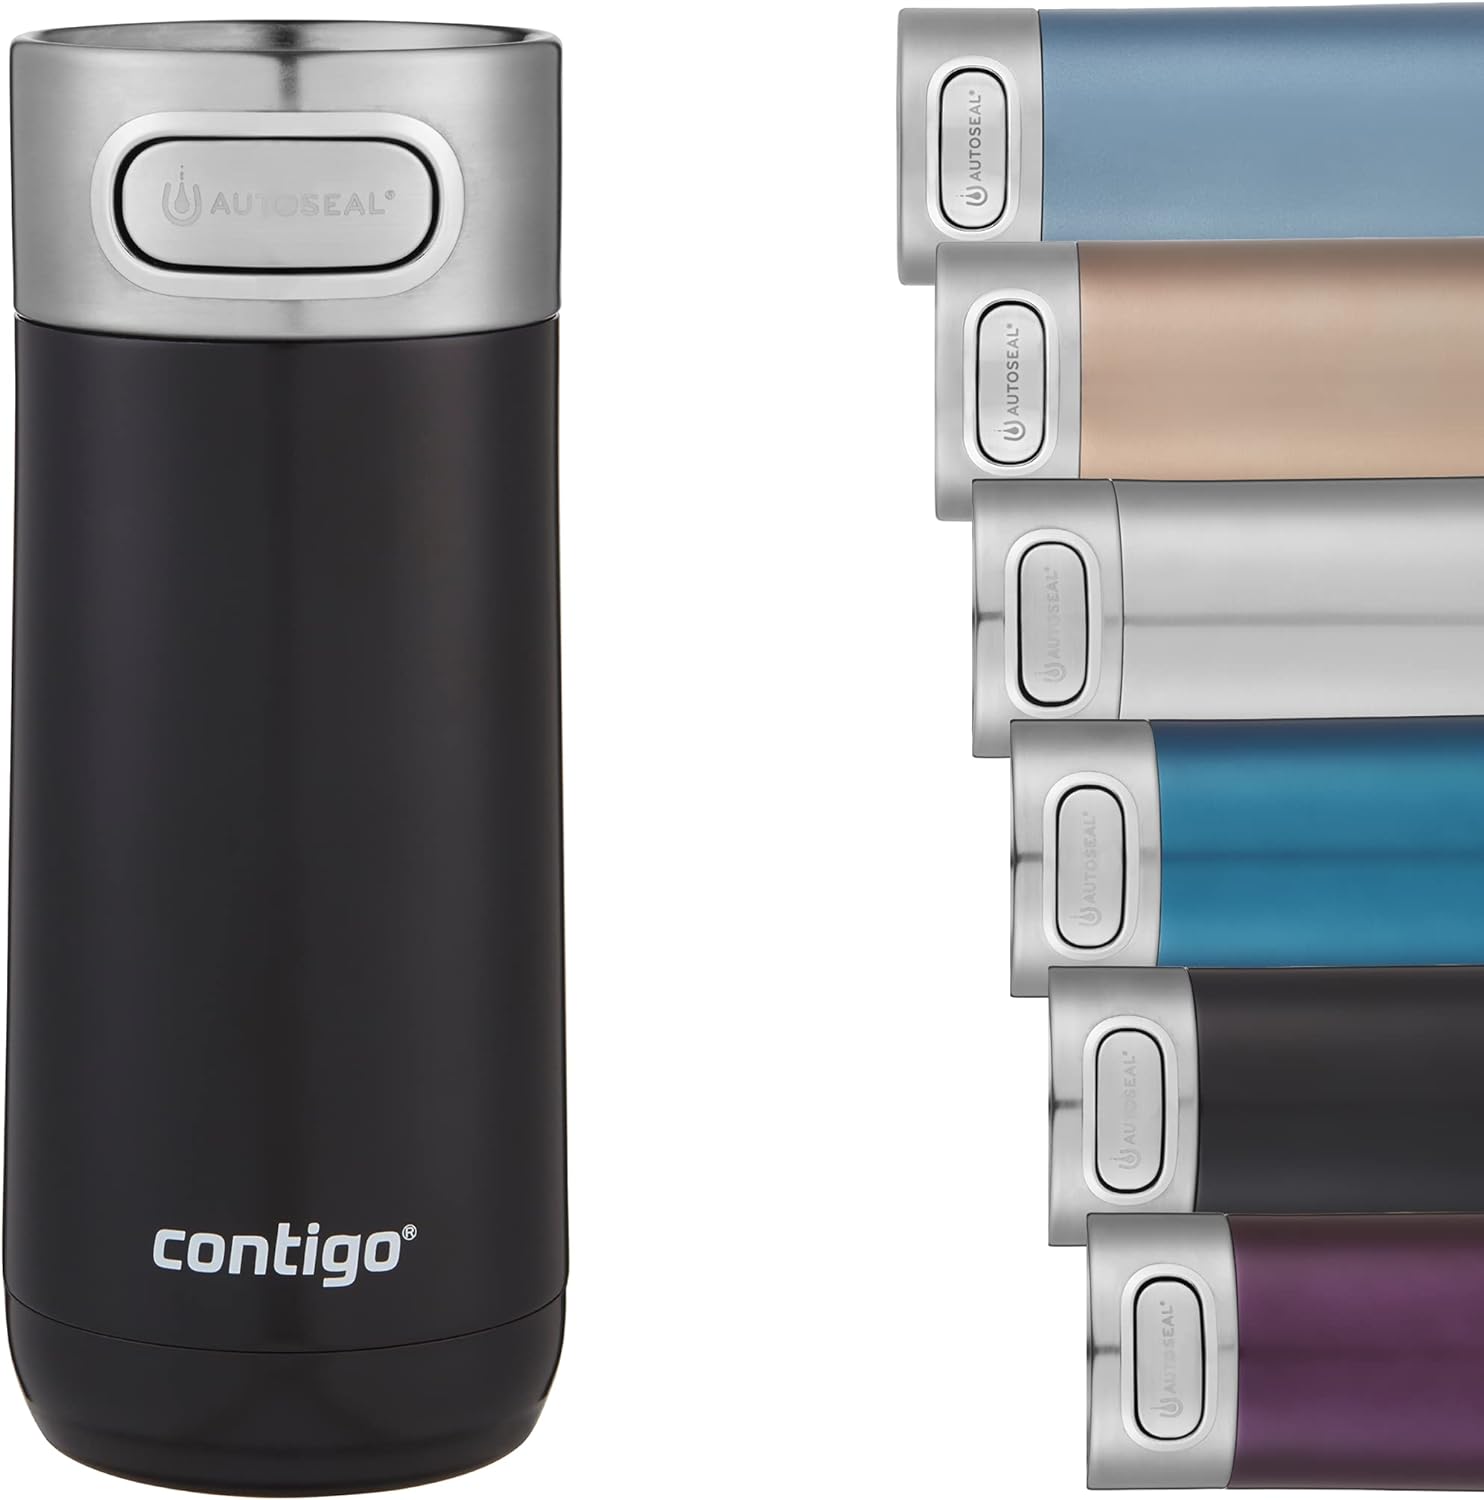 Looking to Buy The Best Tumbler This Year. Here are 10 Key Things to Know Before Buying The Contigo Luxe Stainless Steel Tumbler